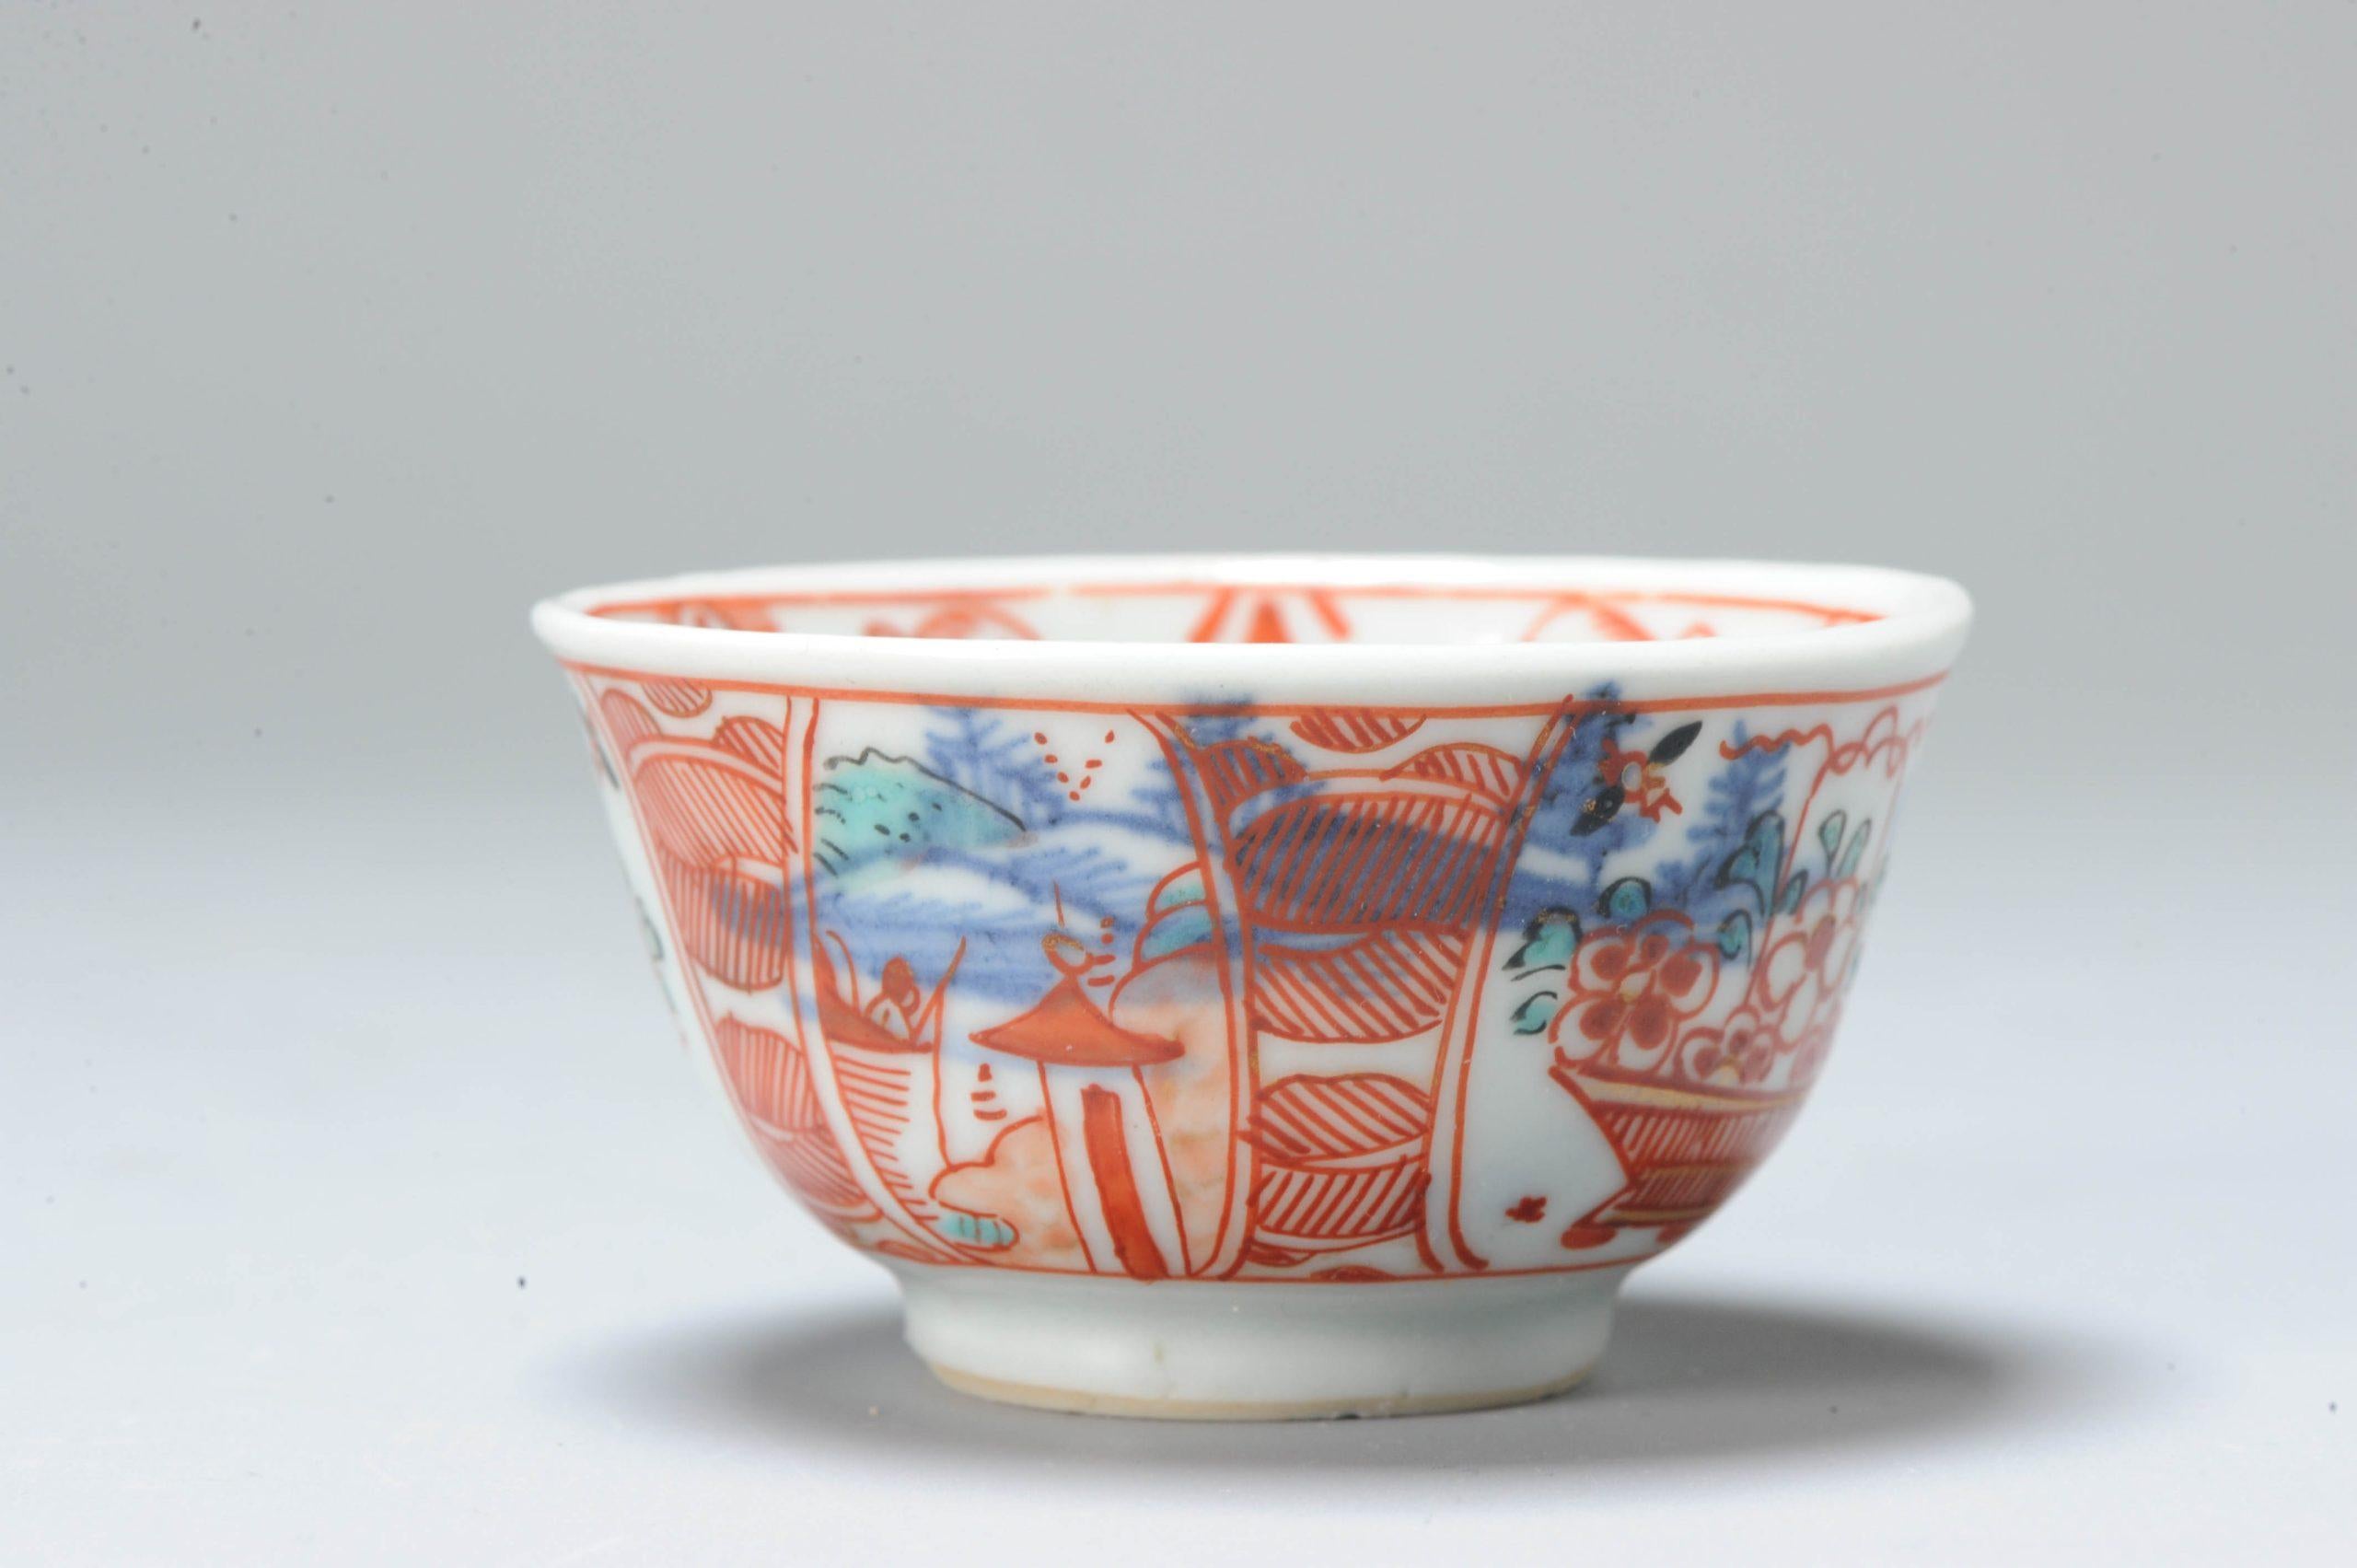 A very nicely made 18th century Qianlong Amsterdam Bont porcelain bowl with a fantastic underglaze blue scene of a landscape

Take a look at Amsterdams Bont porcelain from China. A relatively unknown niche of Chinese porcelain from ca 1680-1740 that